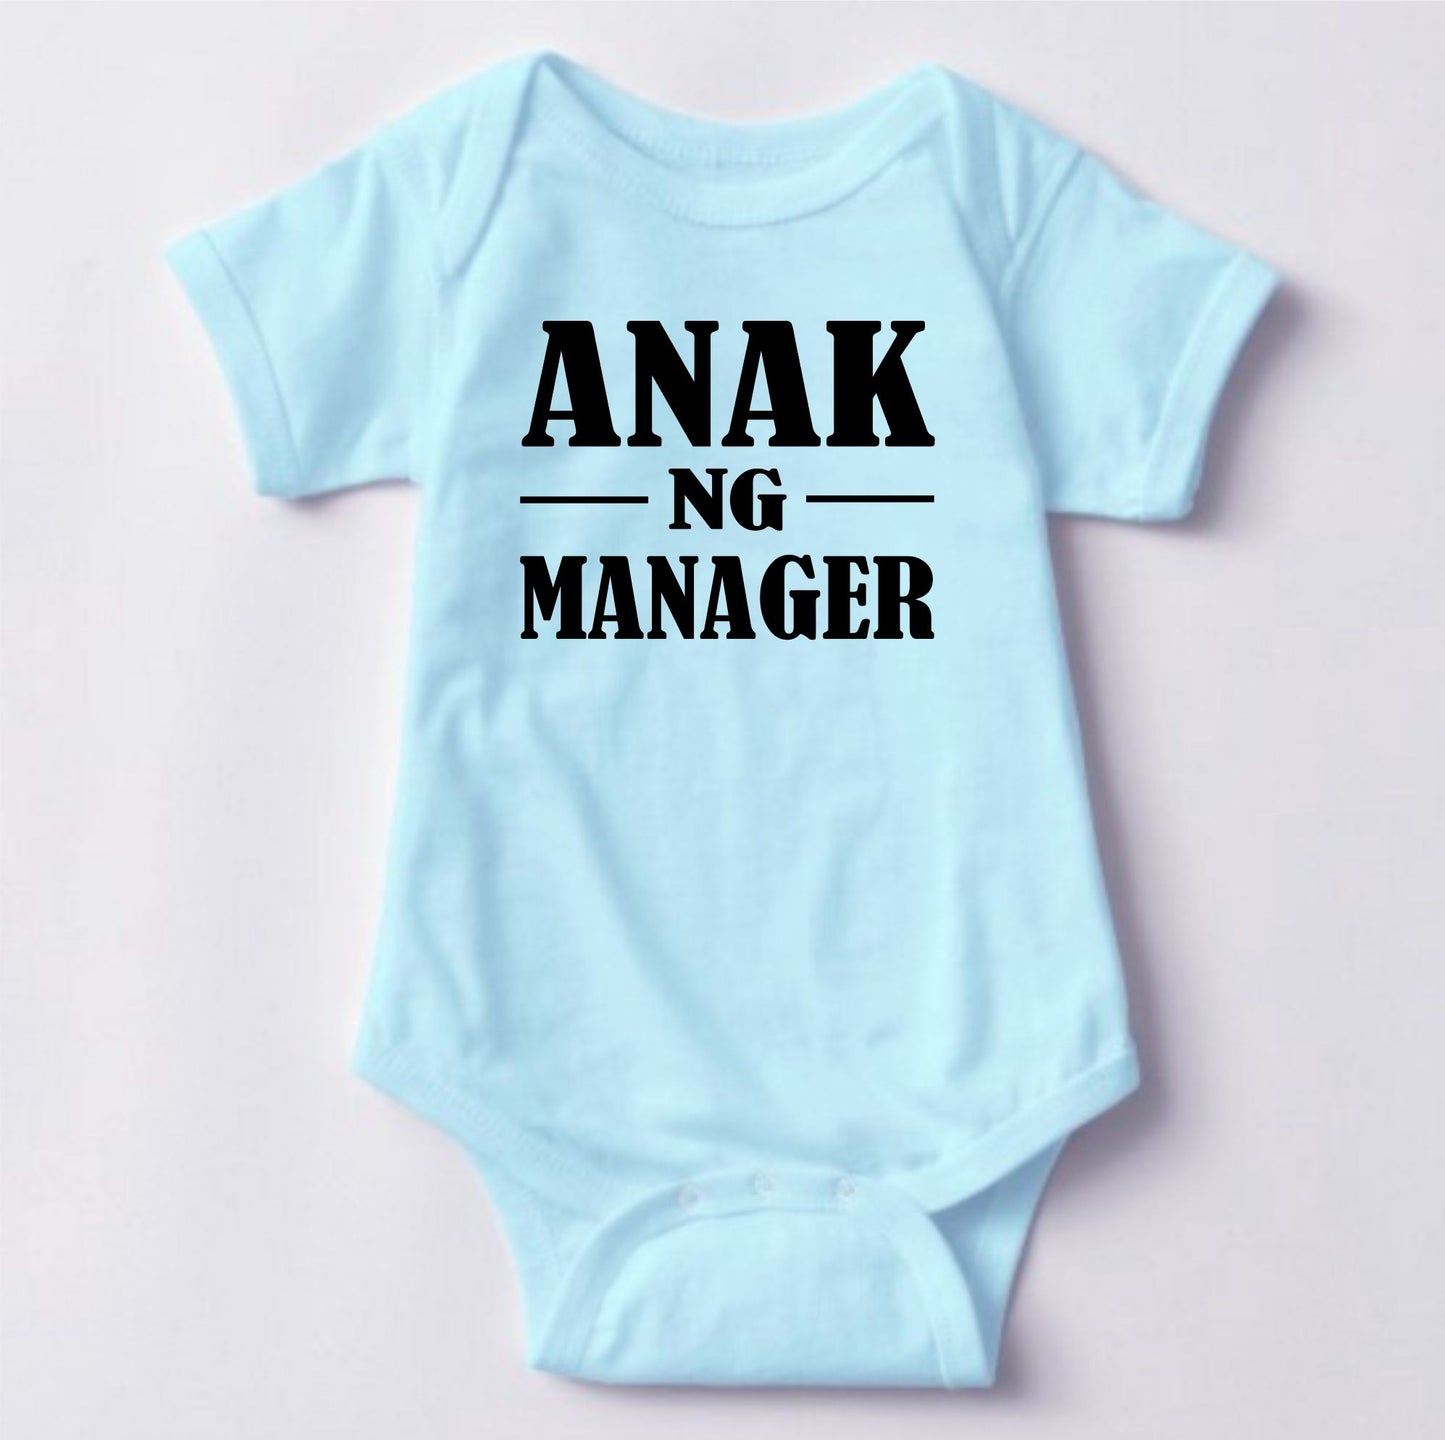 Baby Statement Onesies - Anak ng Manager